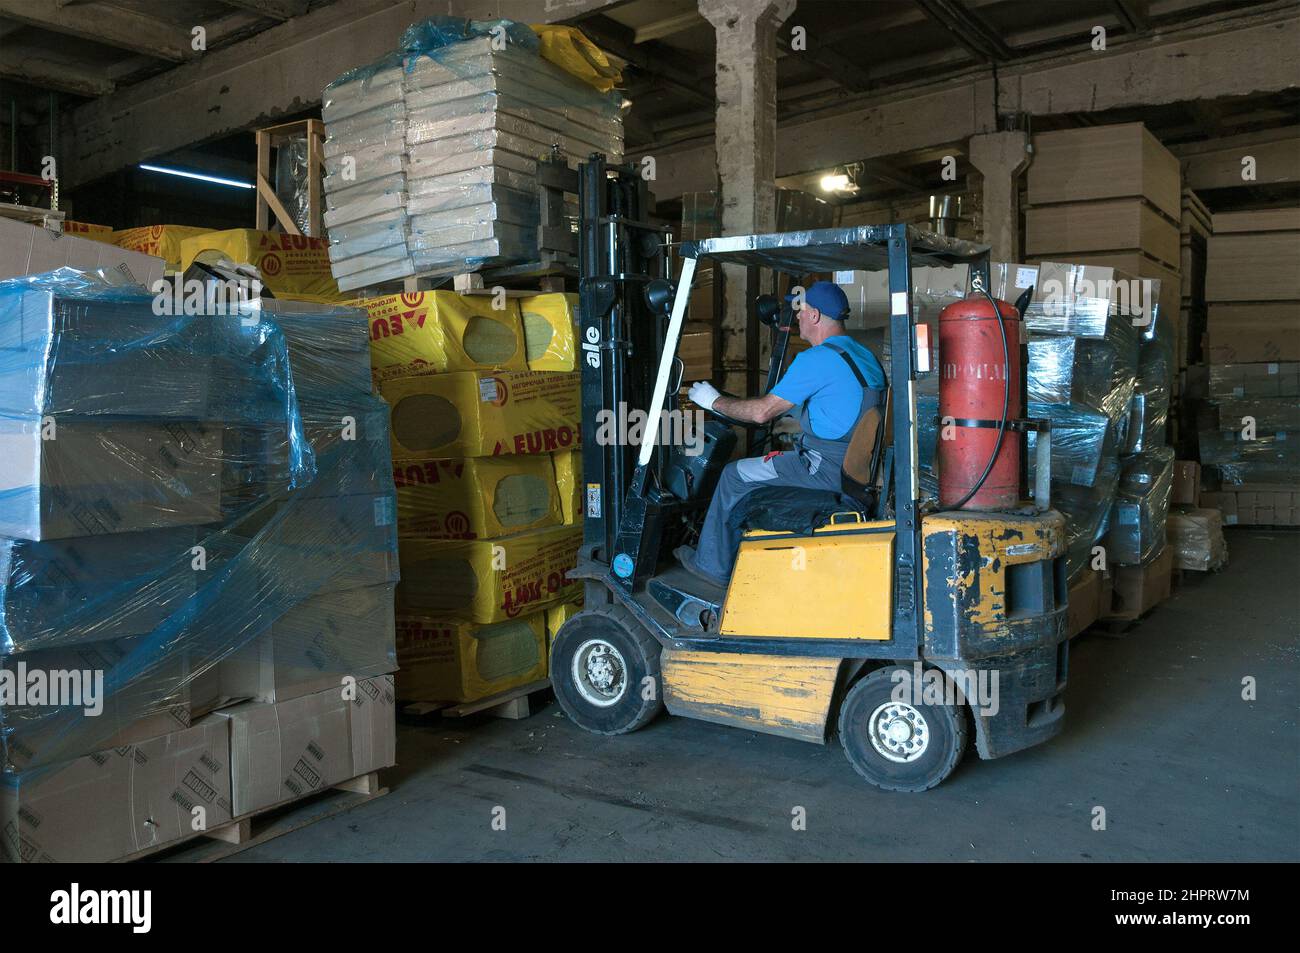 SAINT PETERSBURG, RUSSIA - AUGUST 10, 2021: A forklift truck works at a warehouse of construction materials Stock Photo